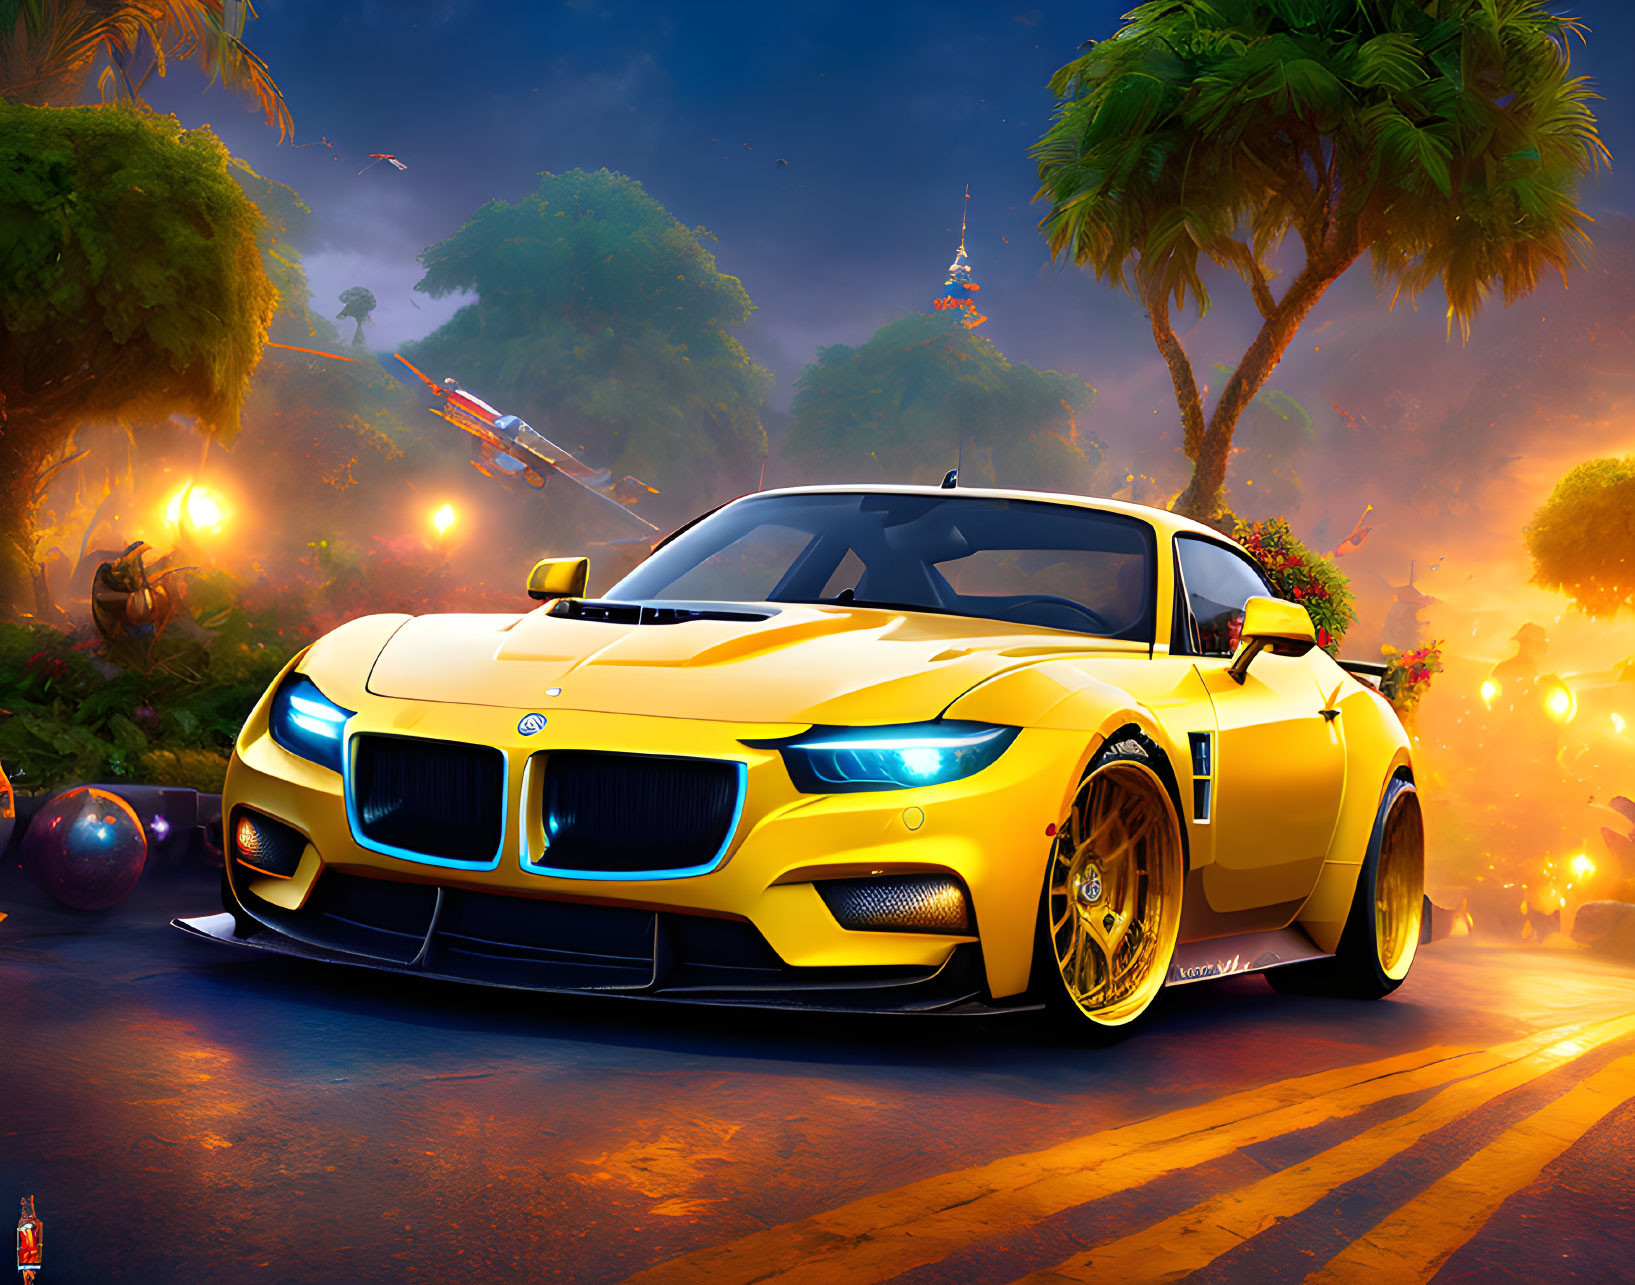 Yellow Sports Car with Gold Rims Speeding in Colorful Scene